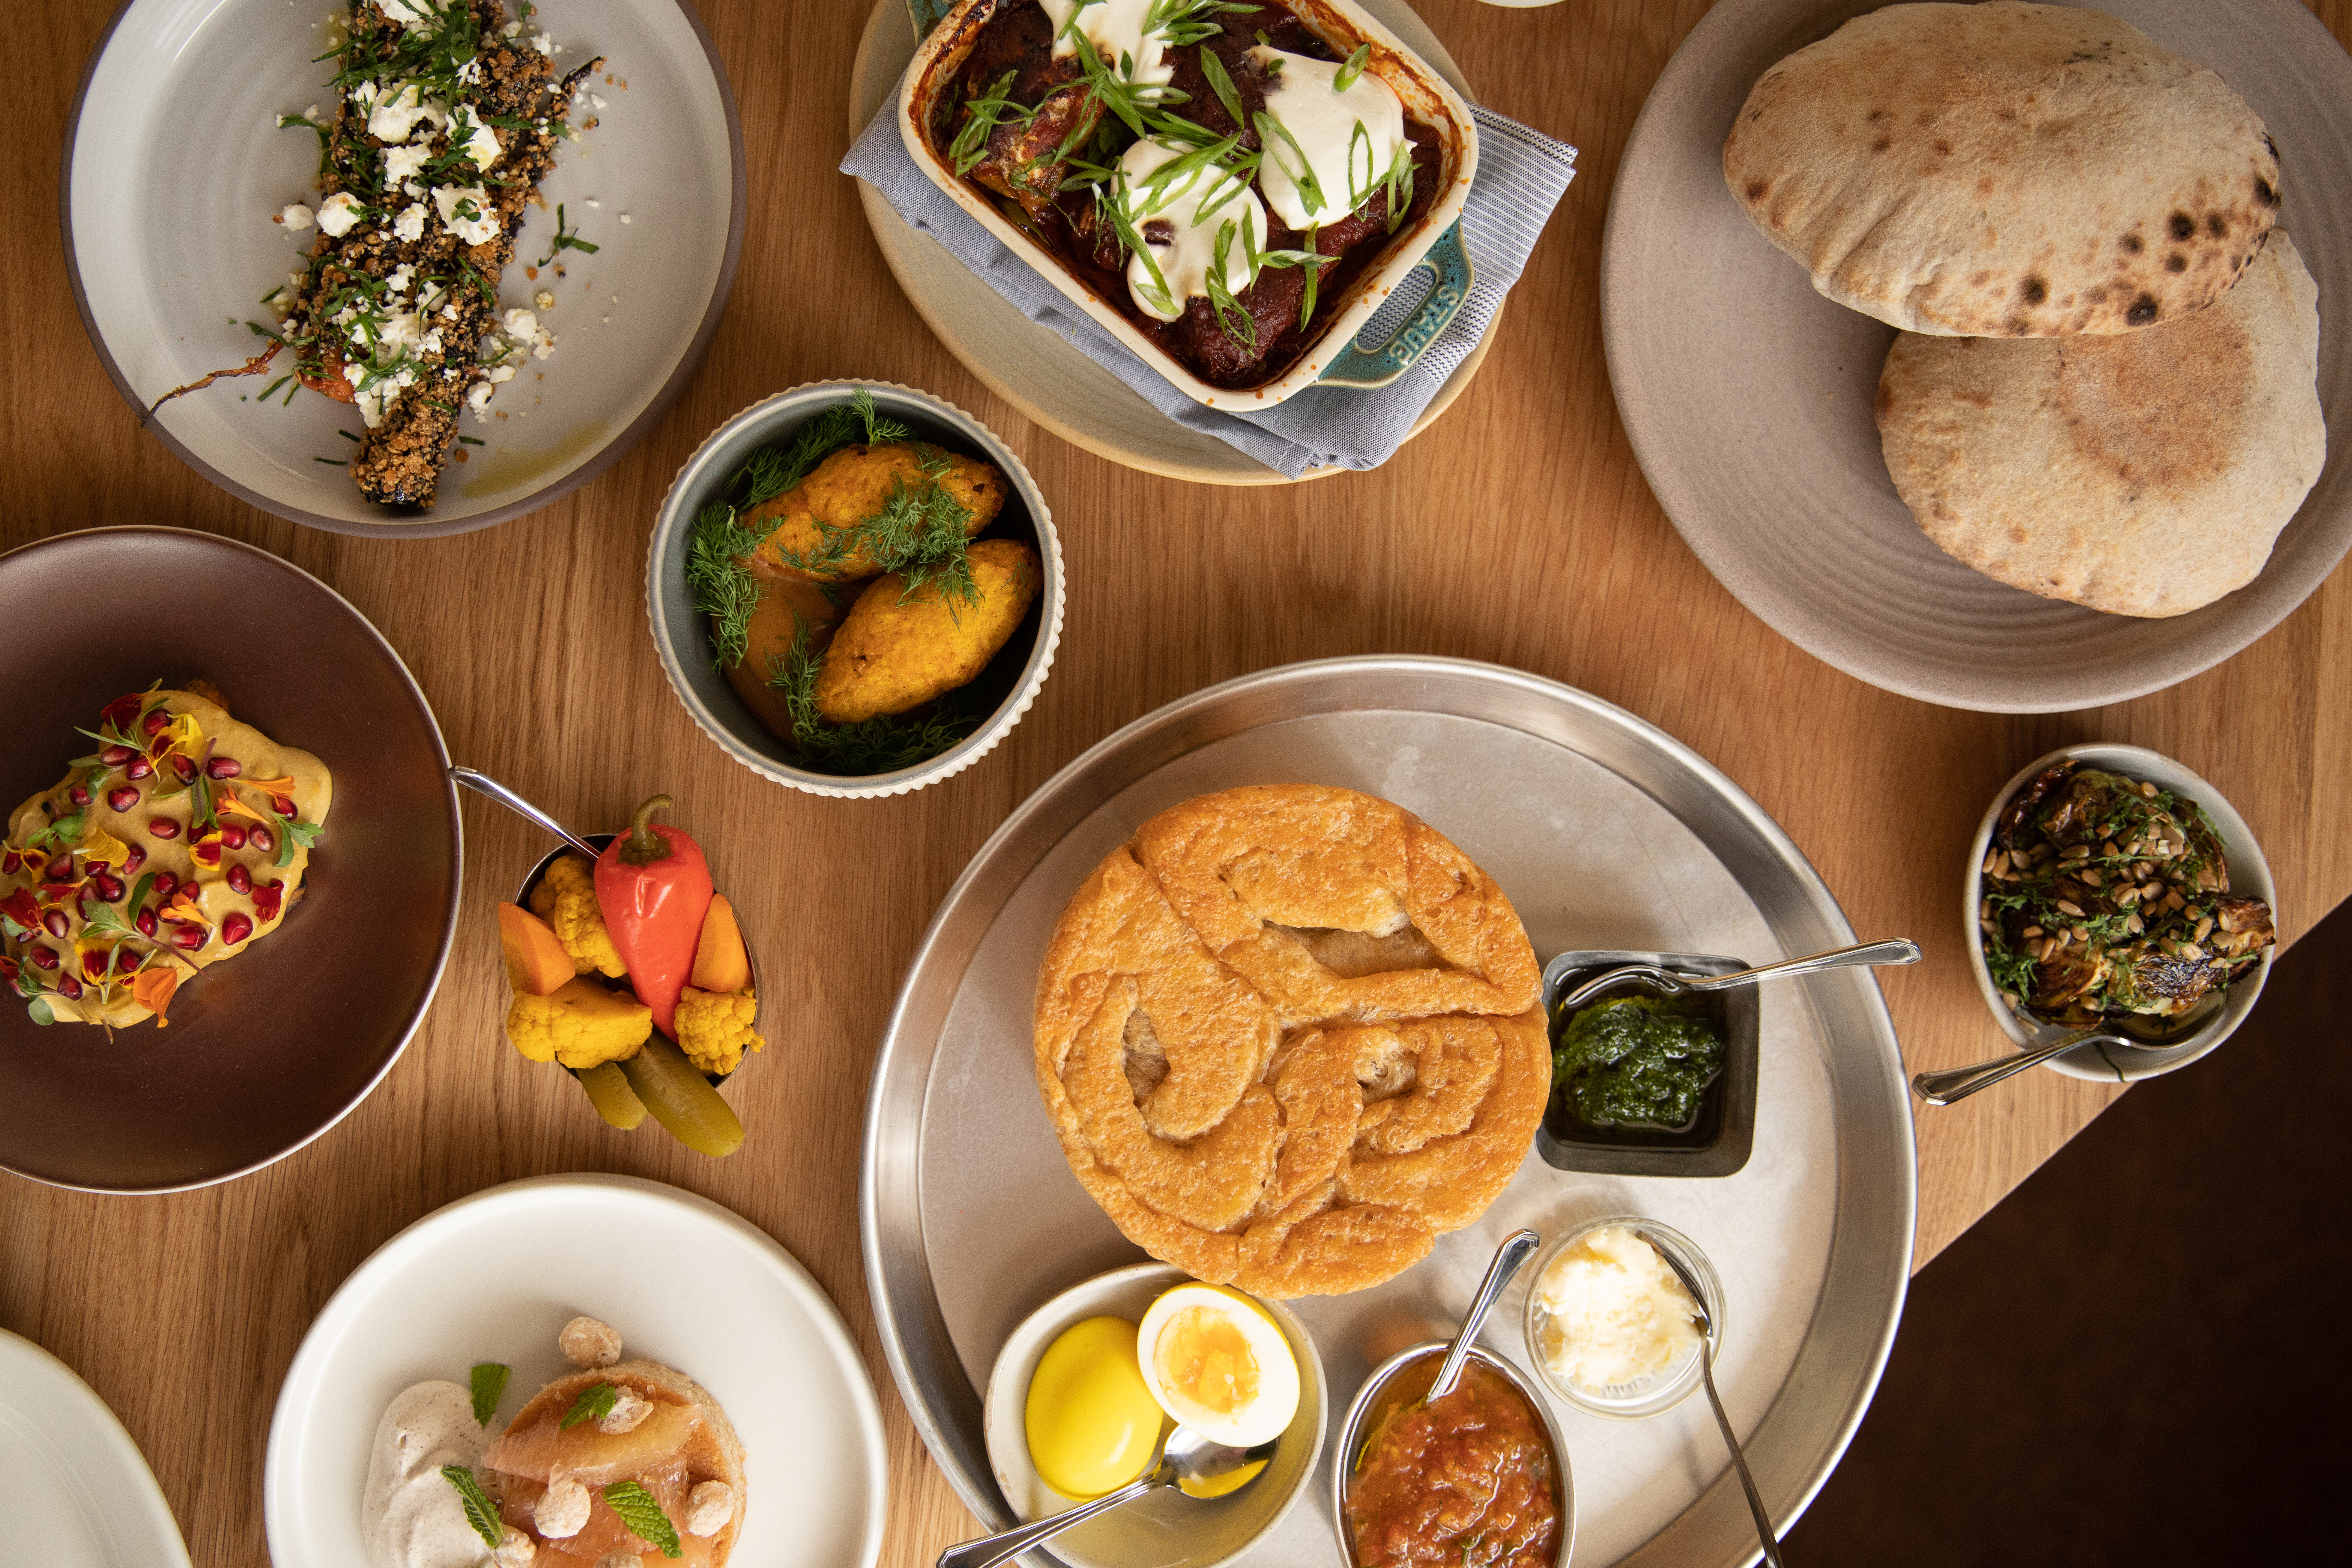 A spread of Galit’s Middle Eastern dishes includes breads, toasts, hummus, pitas, charred vegetables, and more.